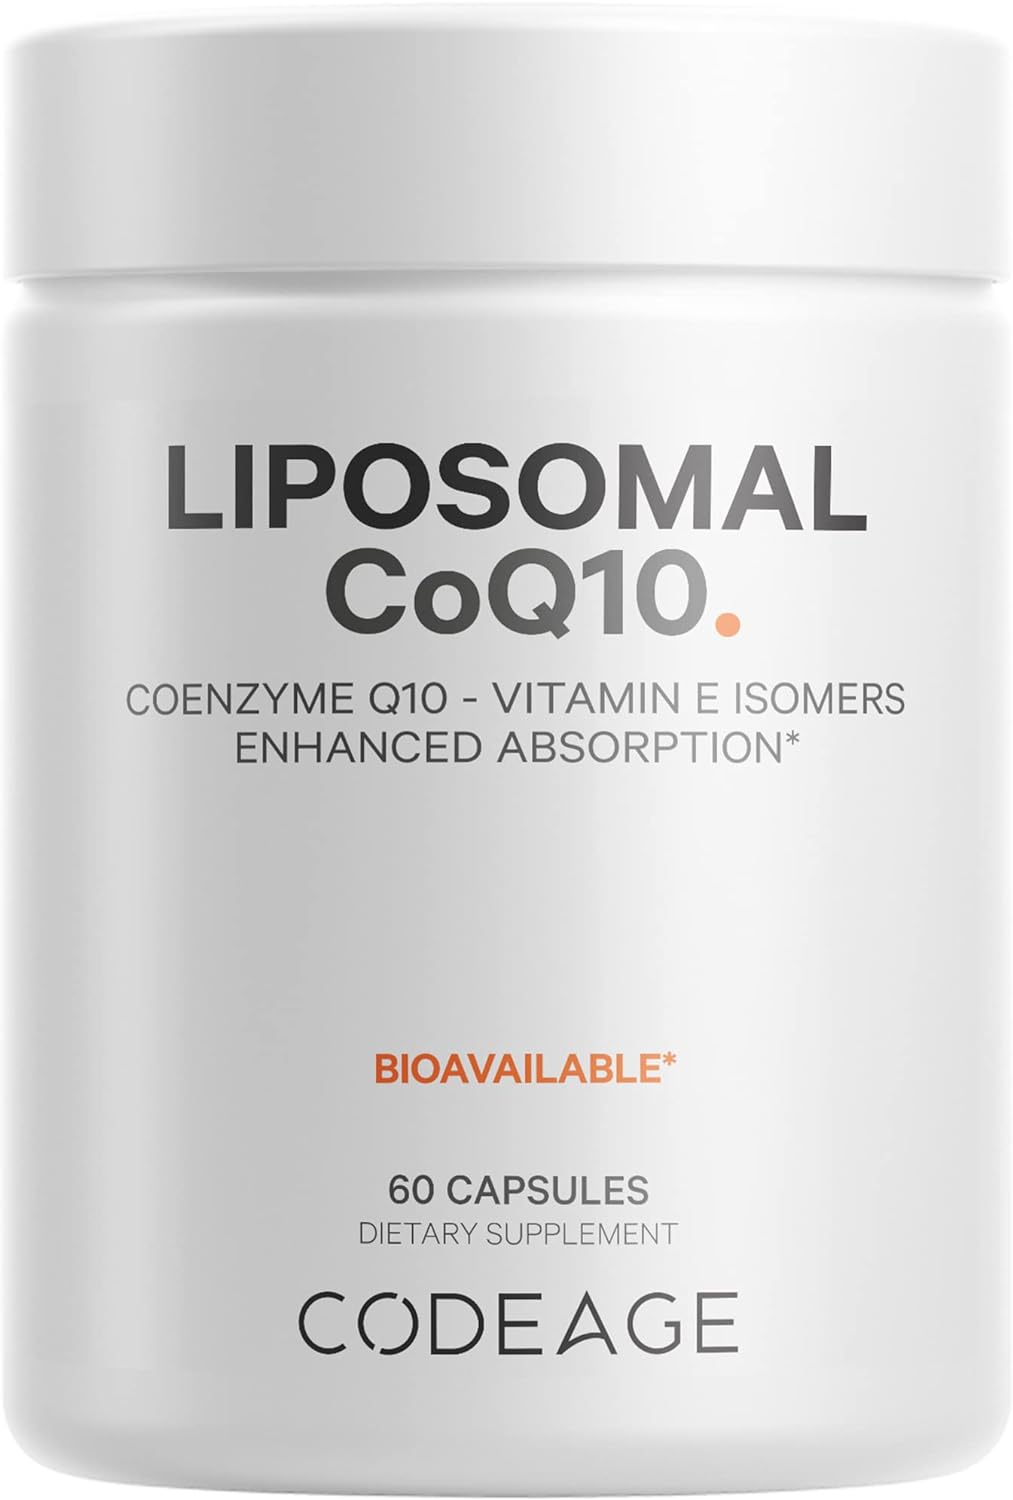 Codeage Liposomal CoQ10 Supplement - Vitamin E Isomers Tocopherols - 125mg Coenzyme Q10 - Cardiovascular, Heart, Energy Support - Liposomal for Bioavailability - 2 Month Supply Non-GMO - 60 Capsules